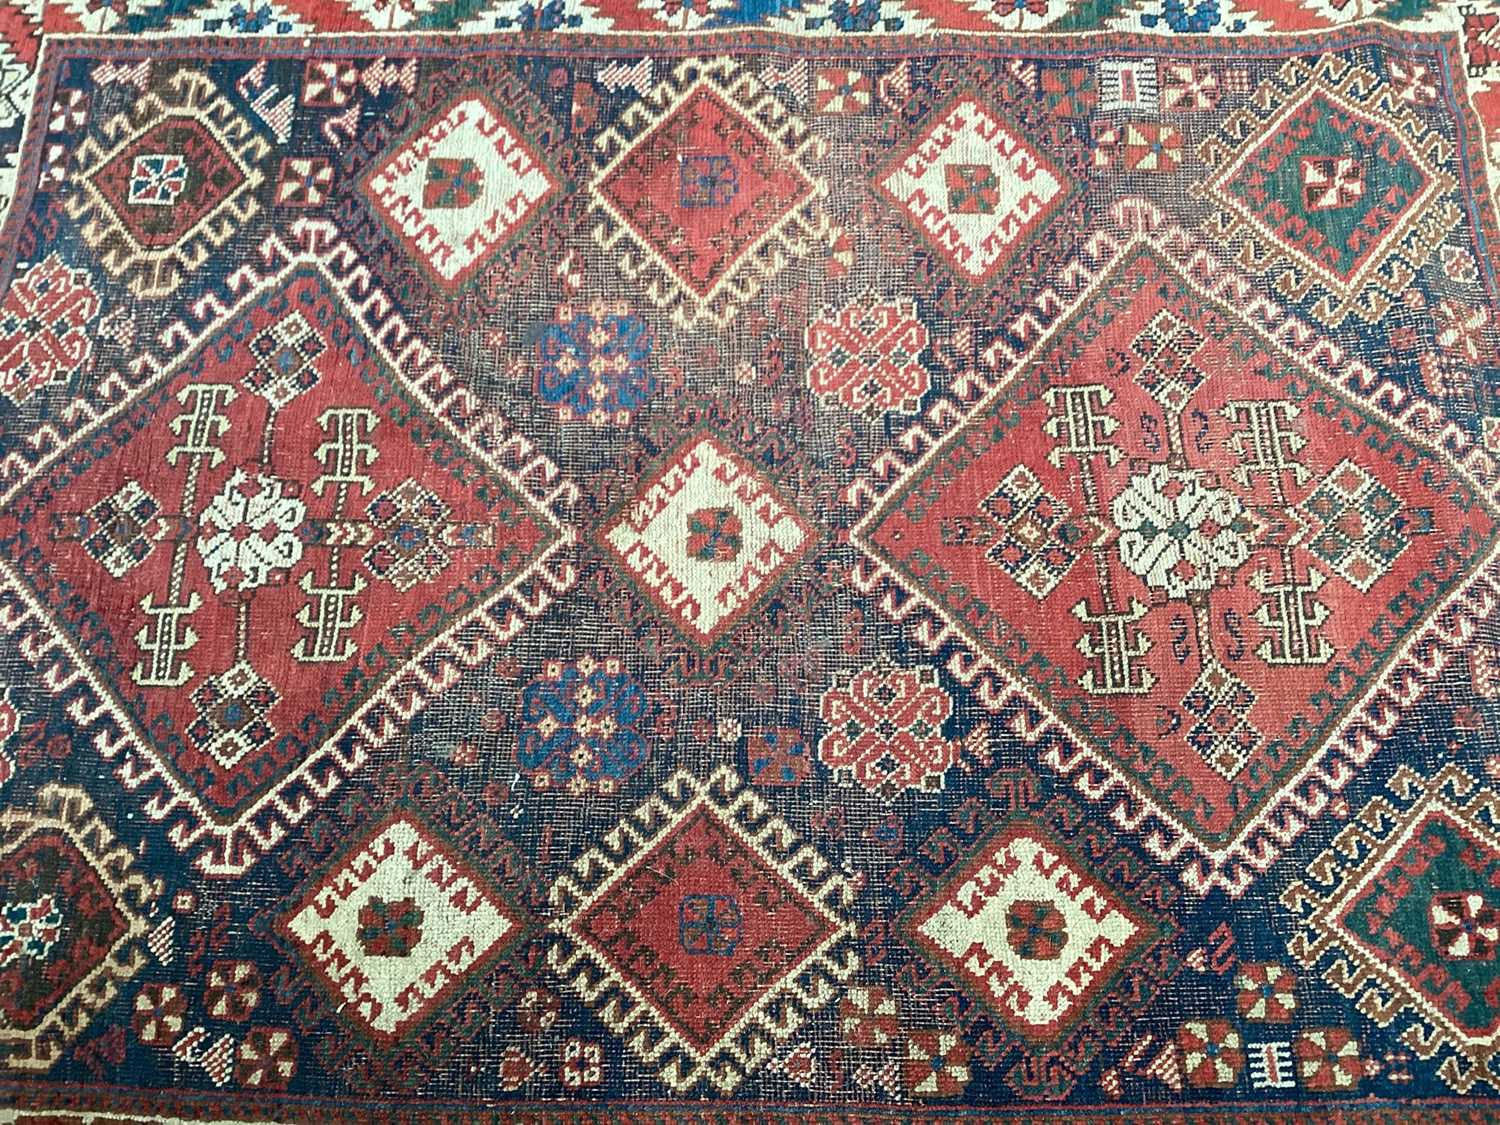 Two Eastern rugs with geometric decoration on red and blue ground, 175cm x 128cm - Image 2 of 6